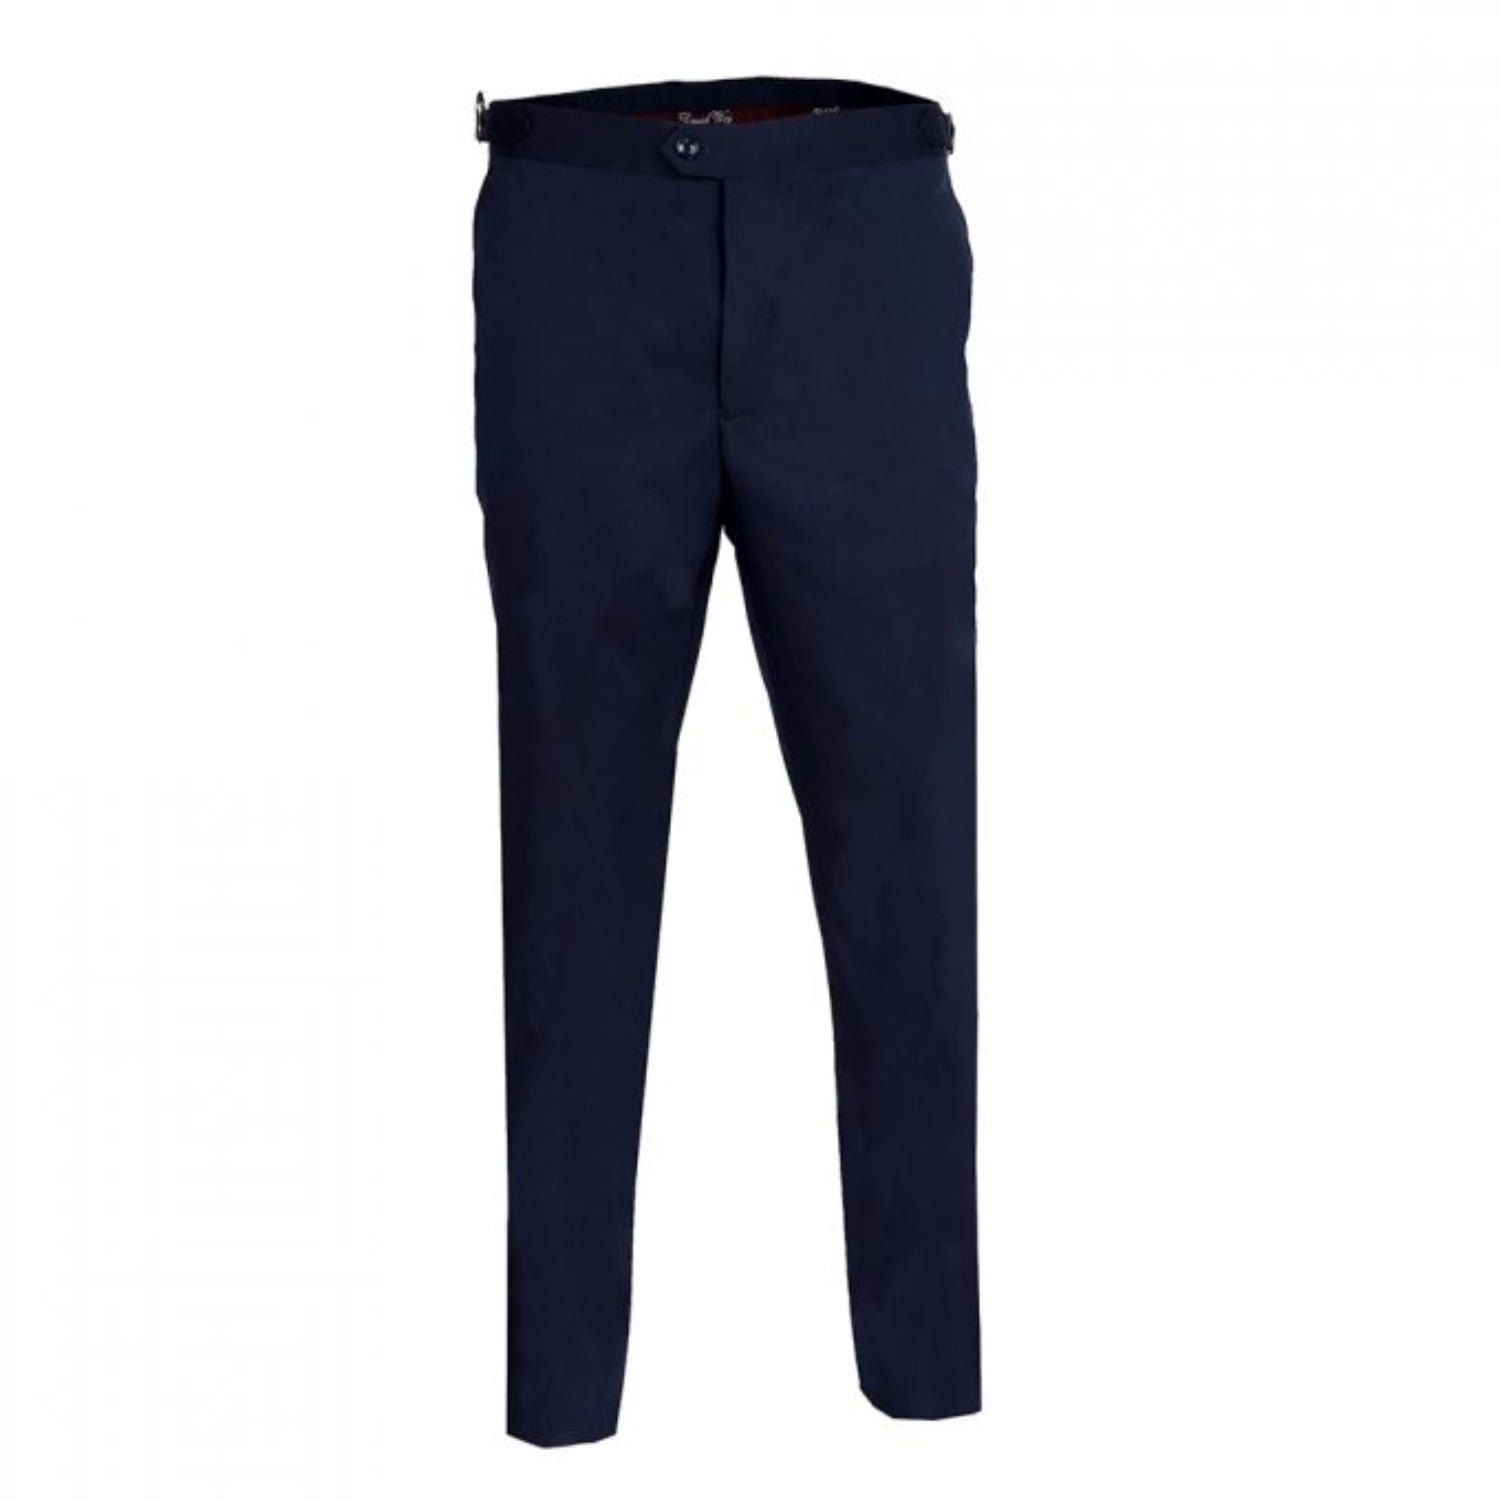 Men’s Blue Plain Dress Trousers With Side Adjusters - Navy 36" David Wej